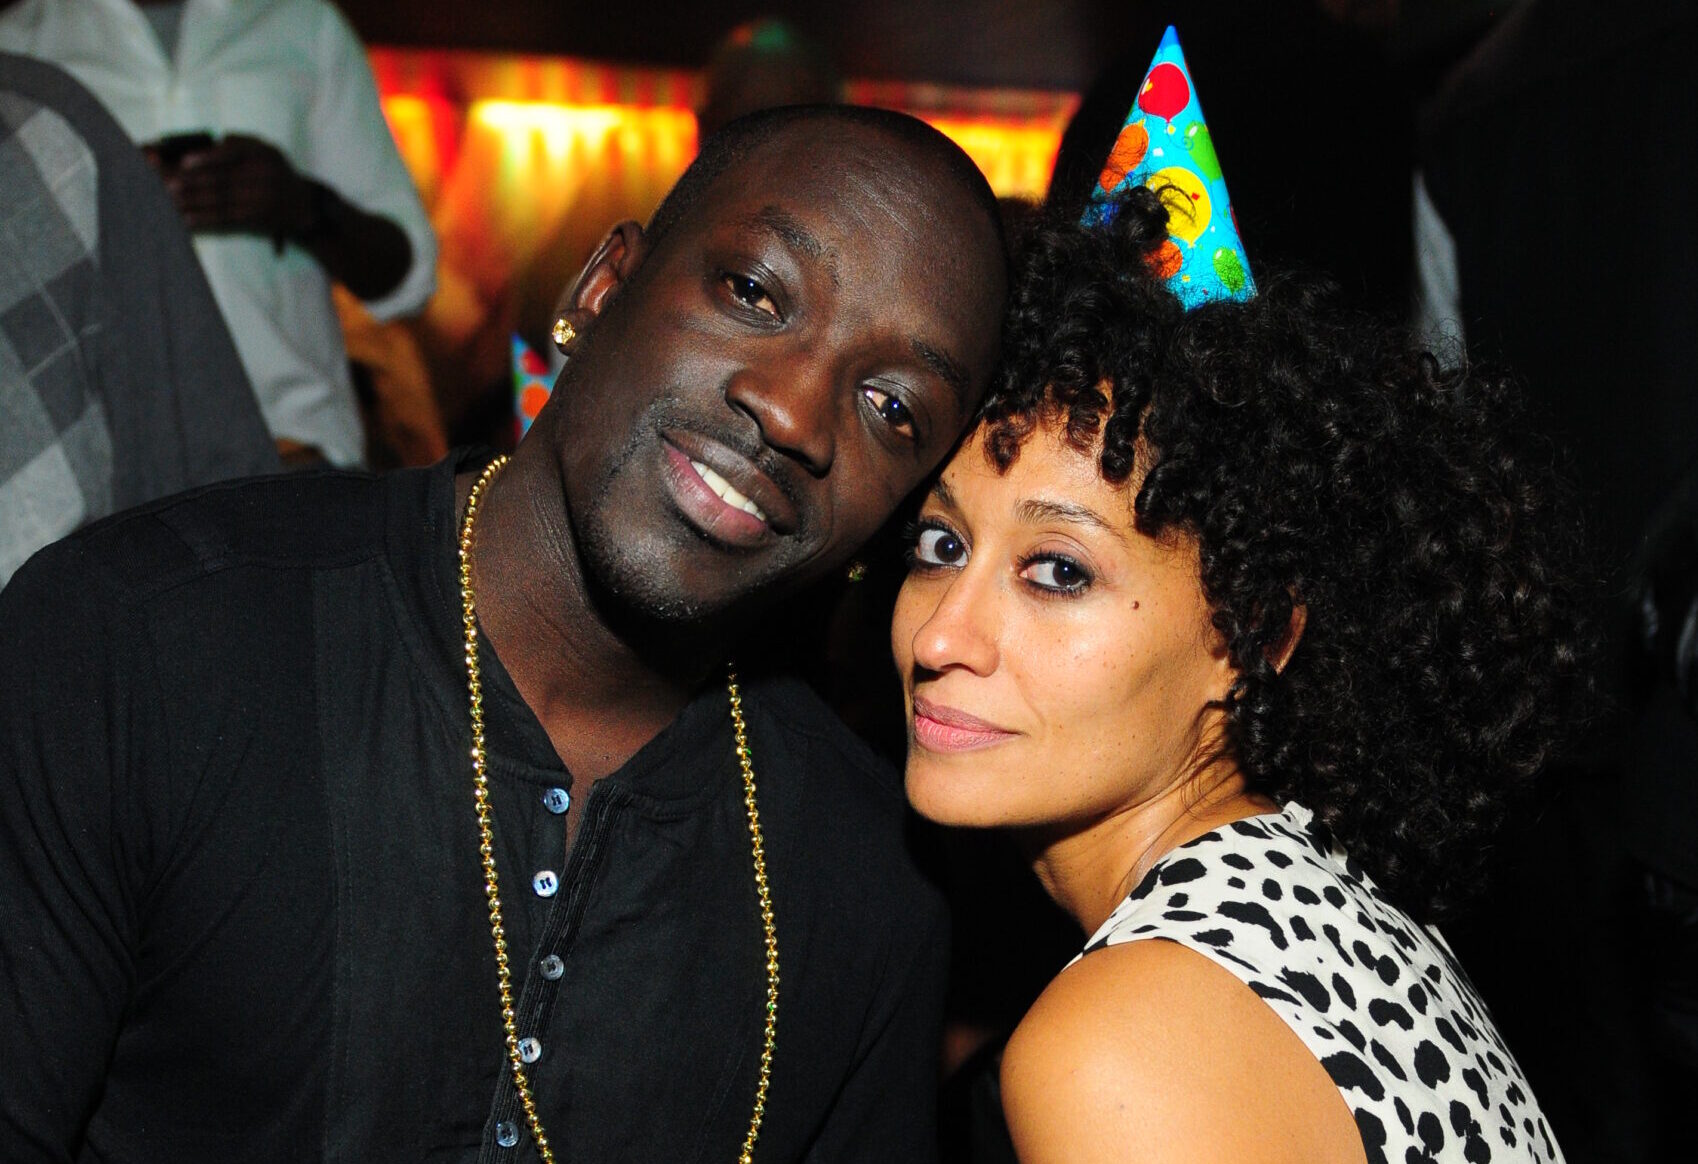 Does Tracee Ellis Ross Have a Partner? Here's All We Know